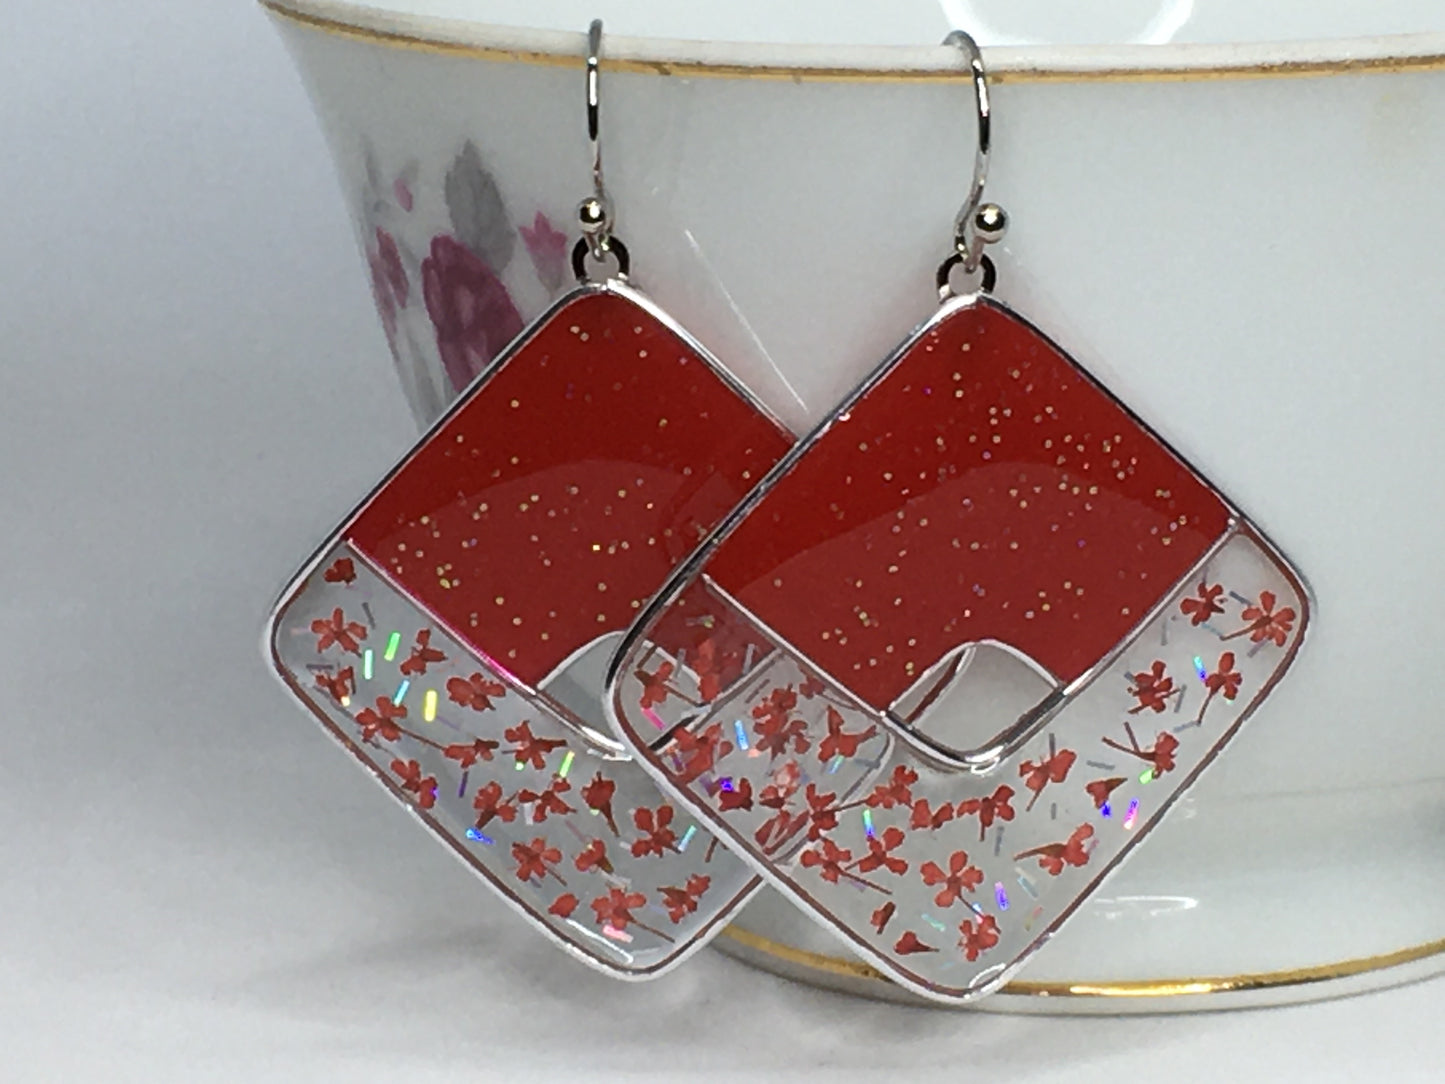 Red glittered earrings with red pressed flowers